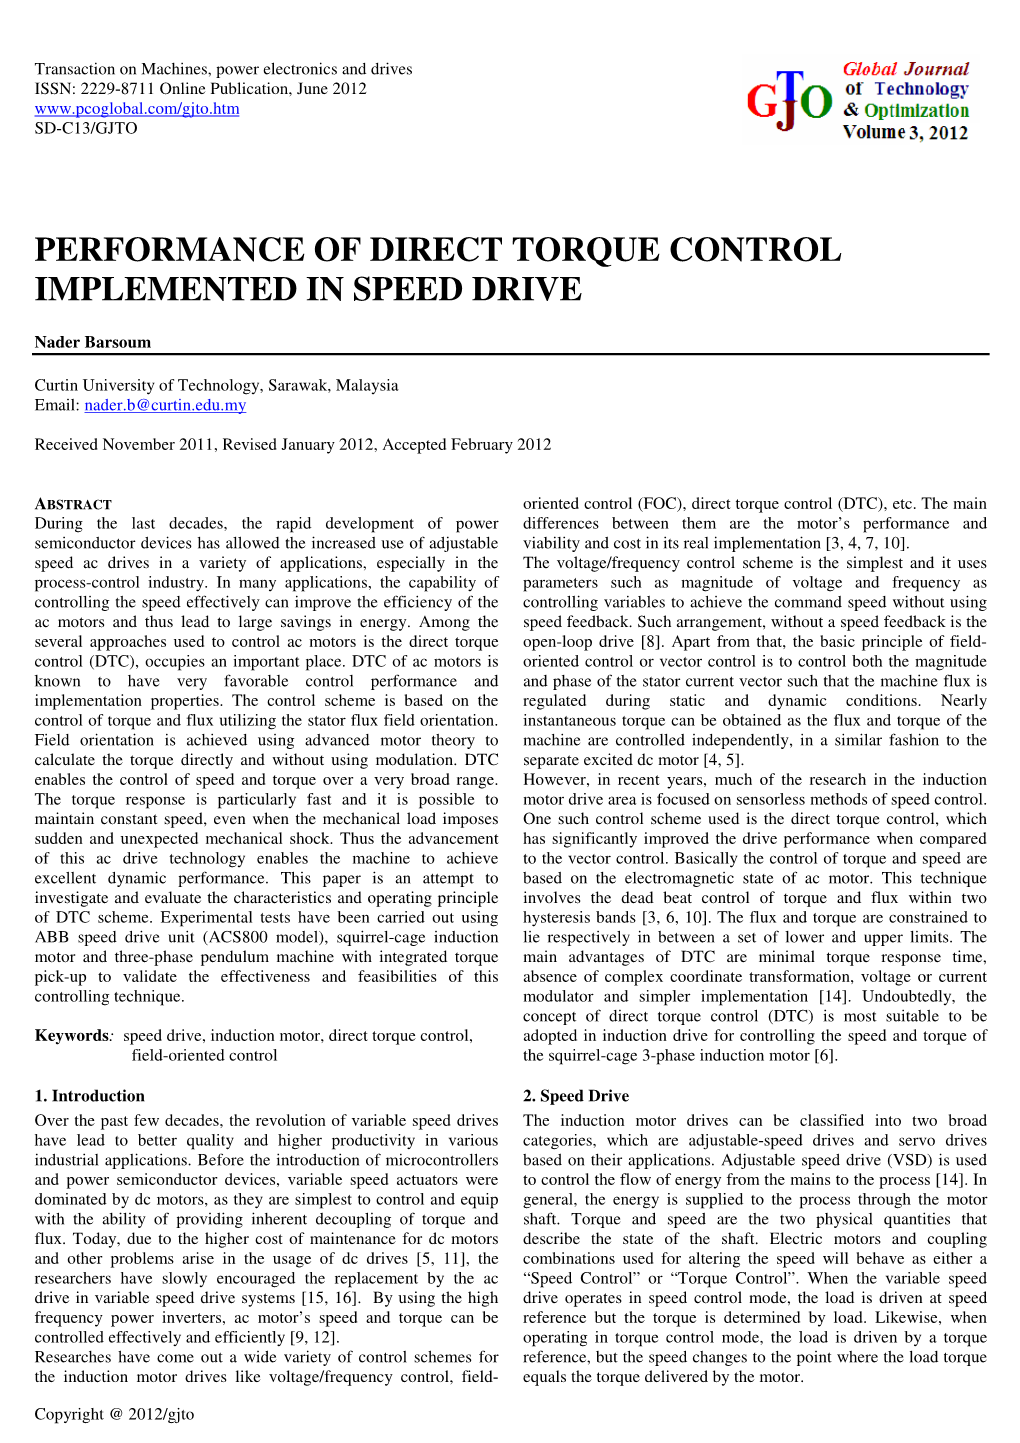 Performance of Direct Torque Control Implemented in Speed Drive